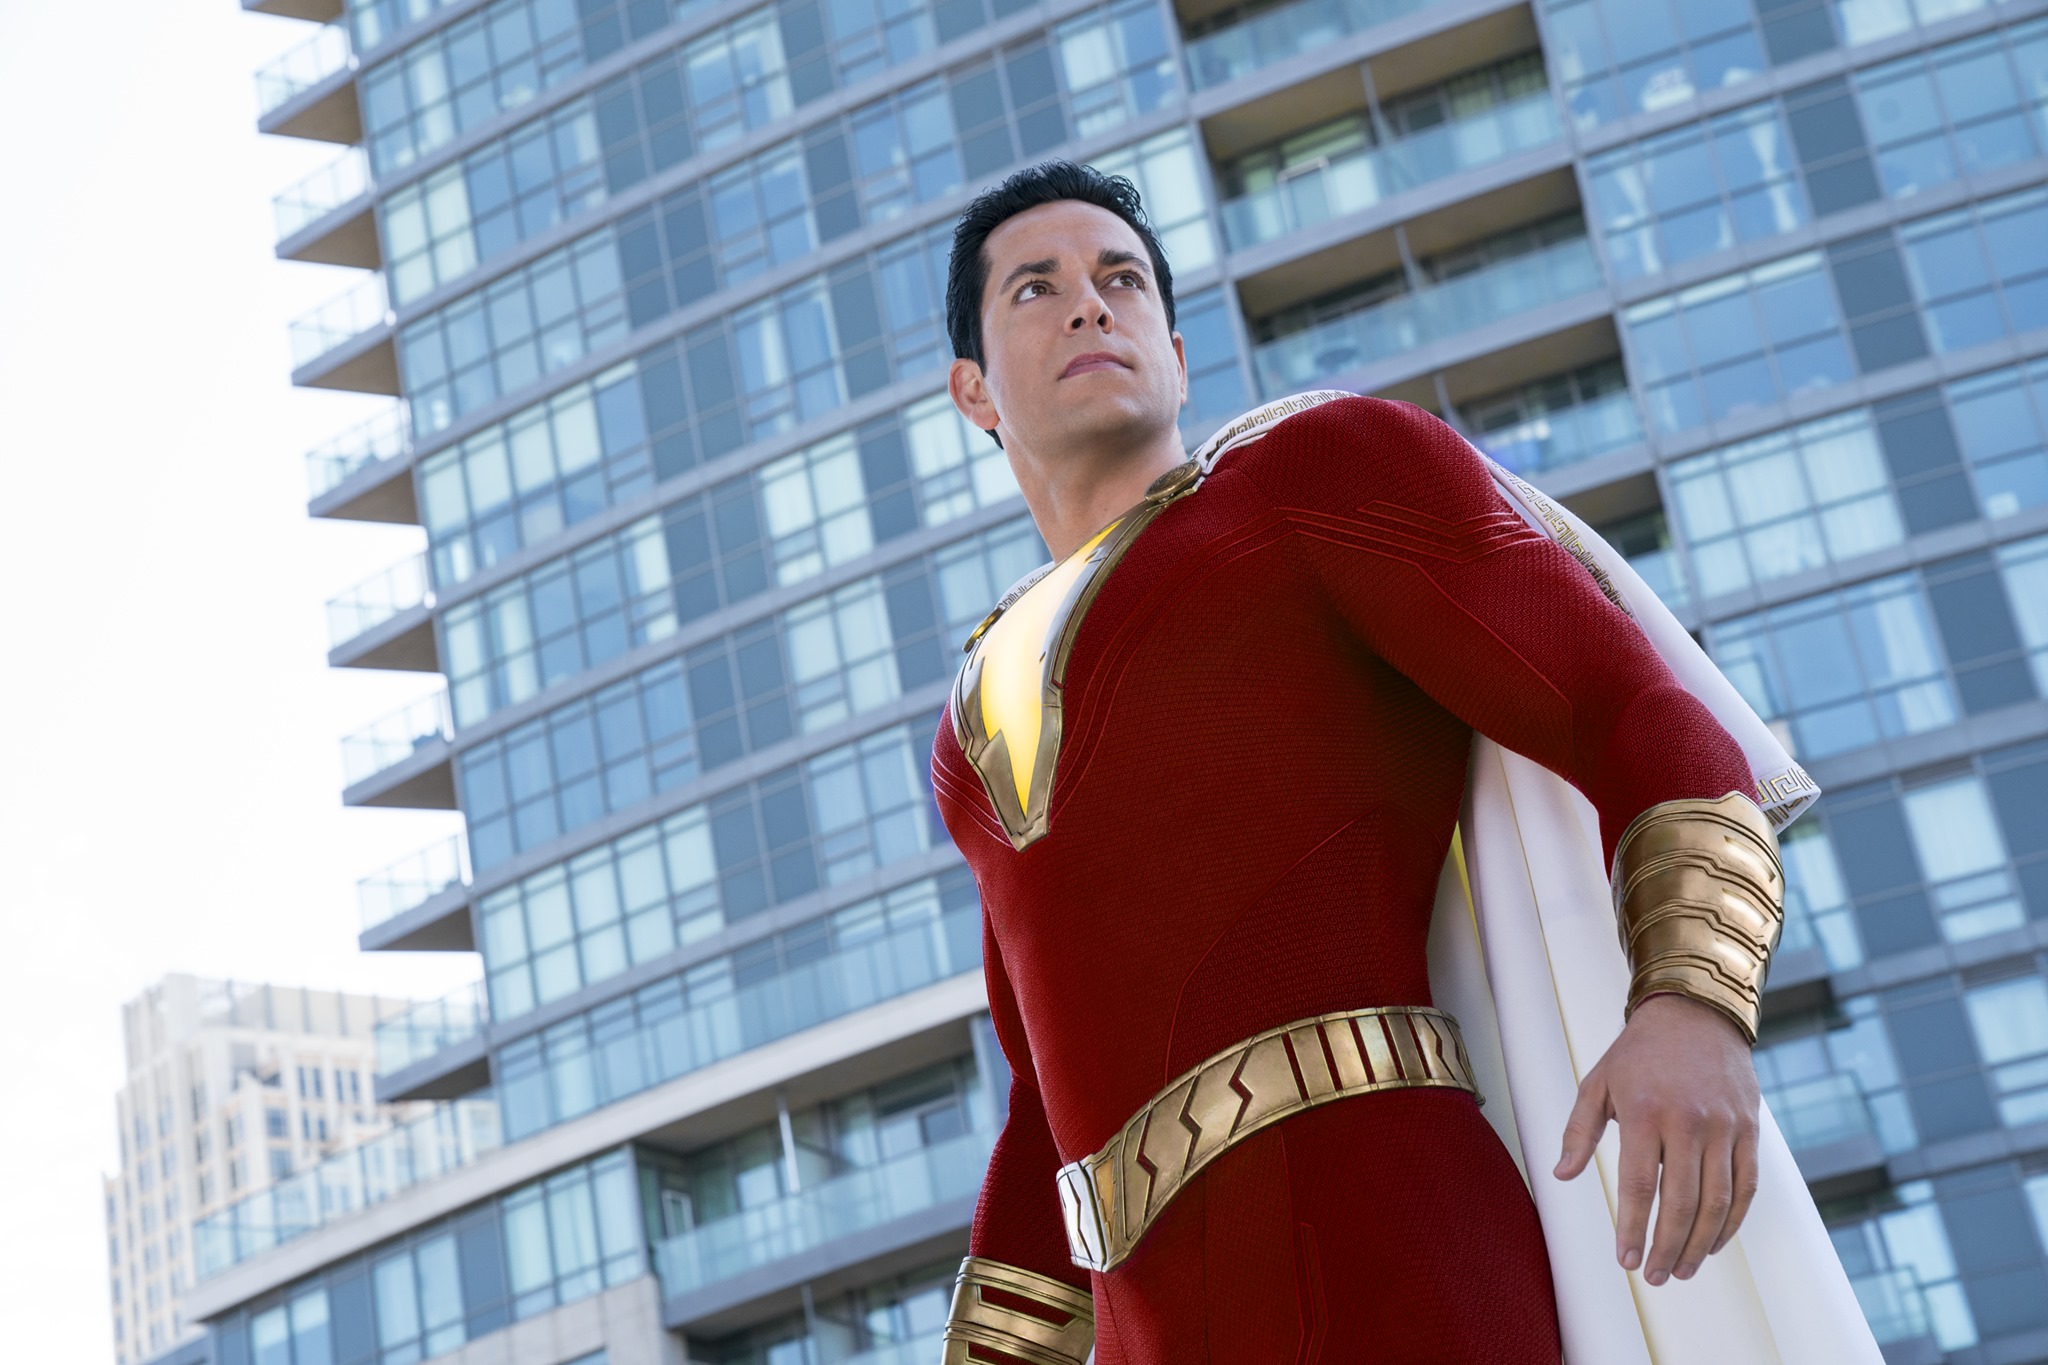 Entertainment News Roundup: ‘Shazam!' sequel pits superhero foster kids against formidable foes; Actor Lance Reddick of 'The Wire' dead at age 60